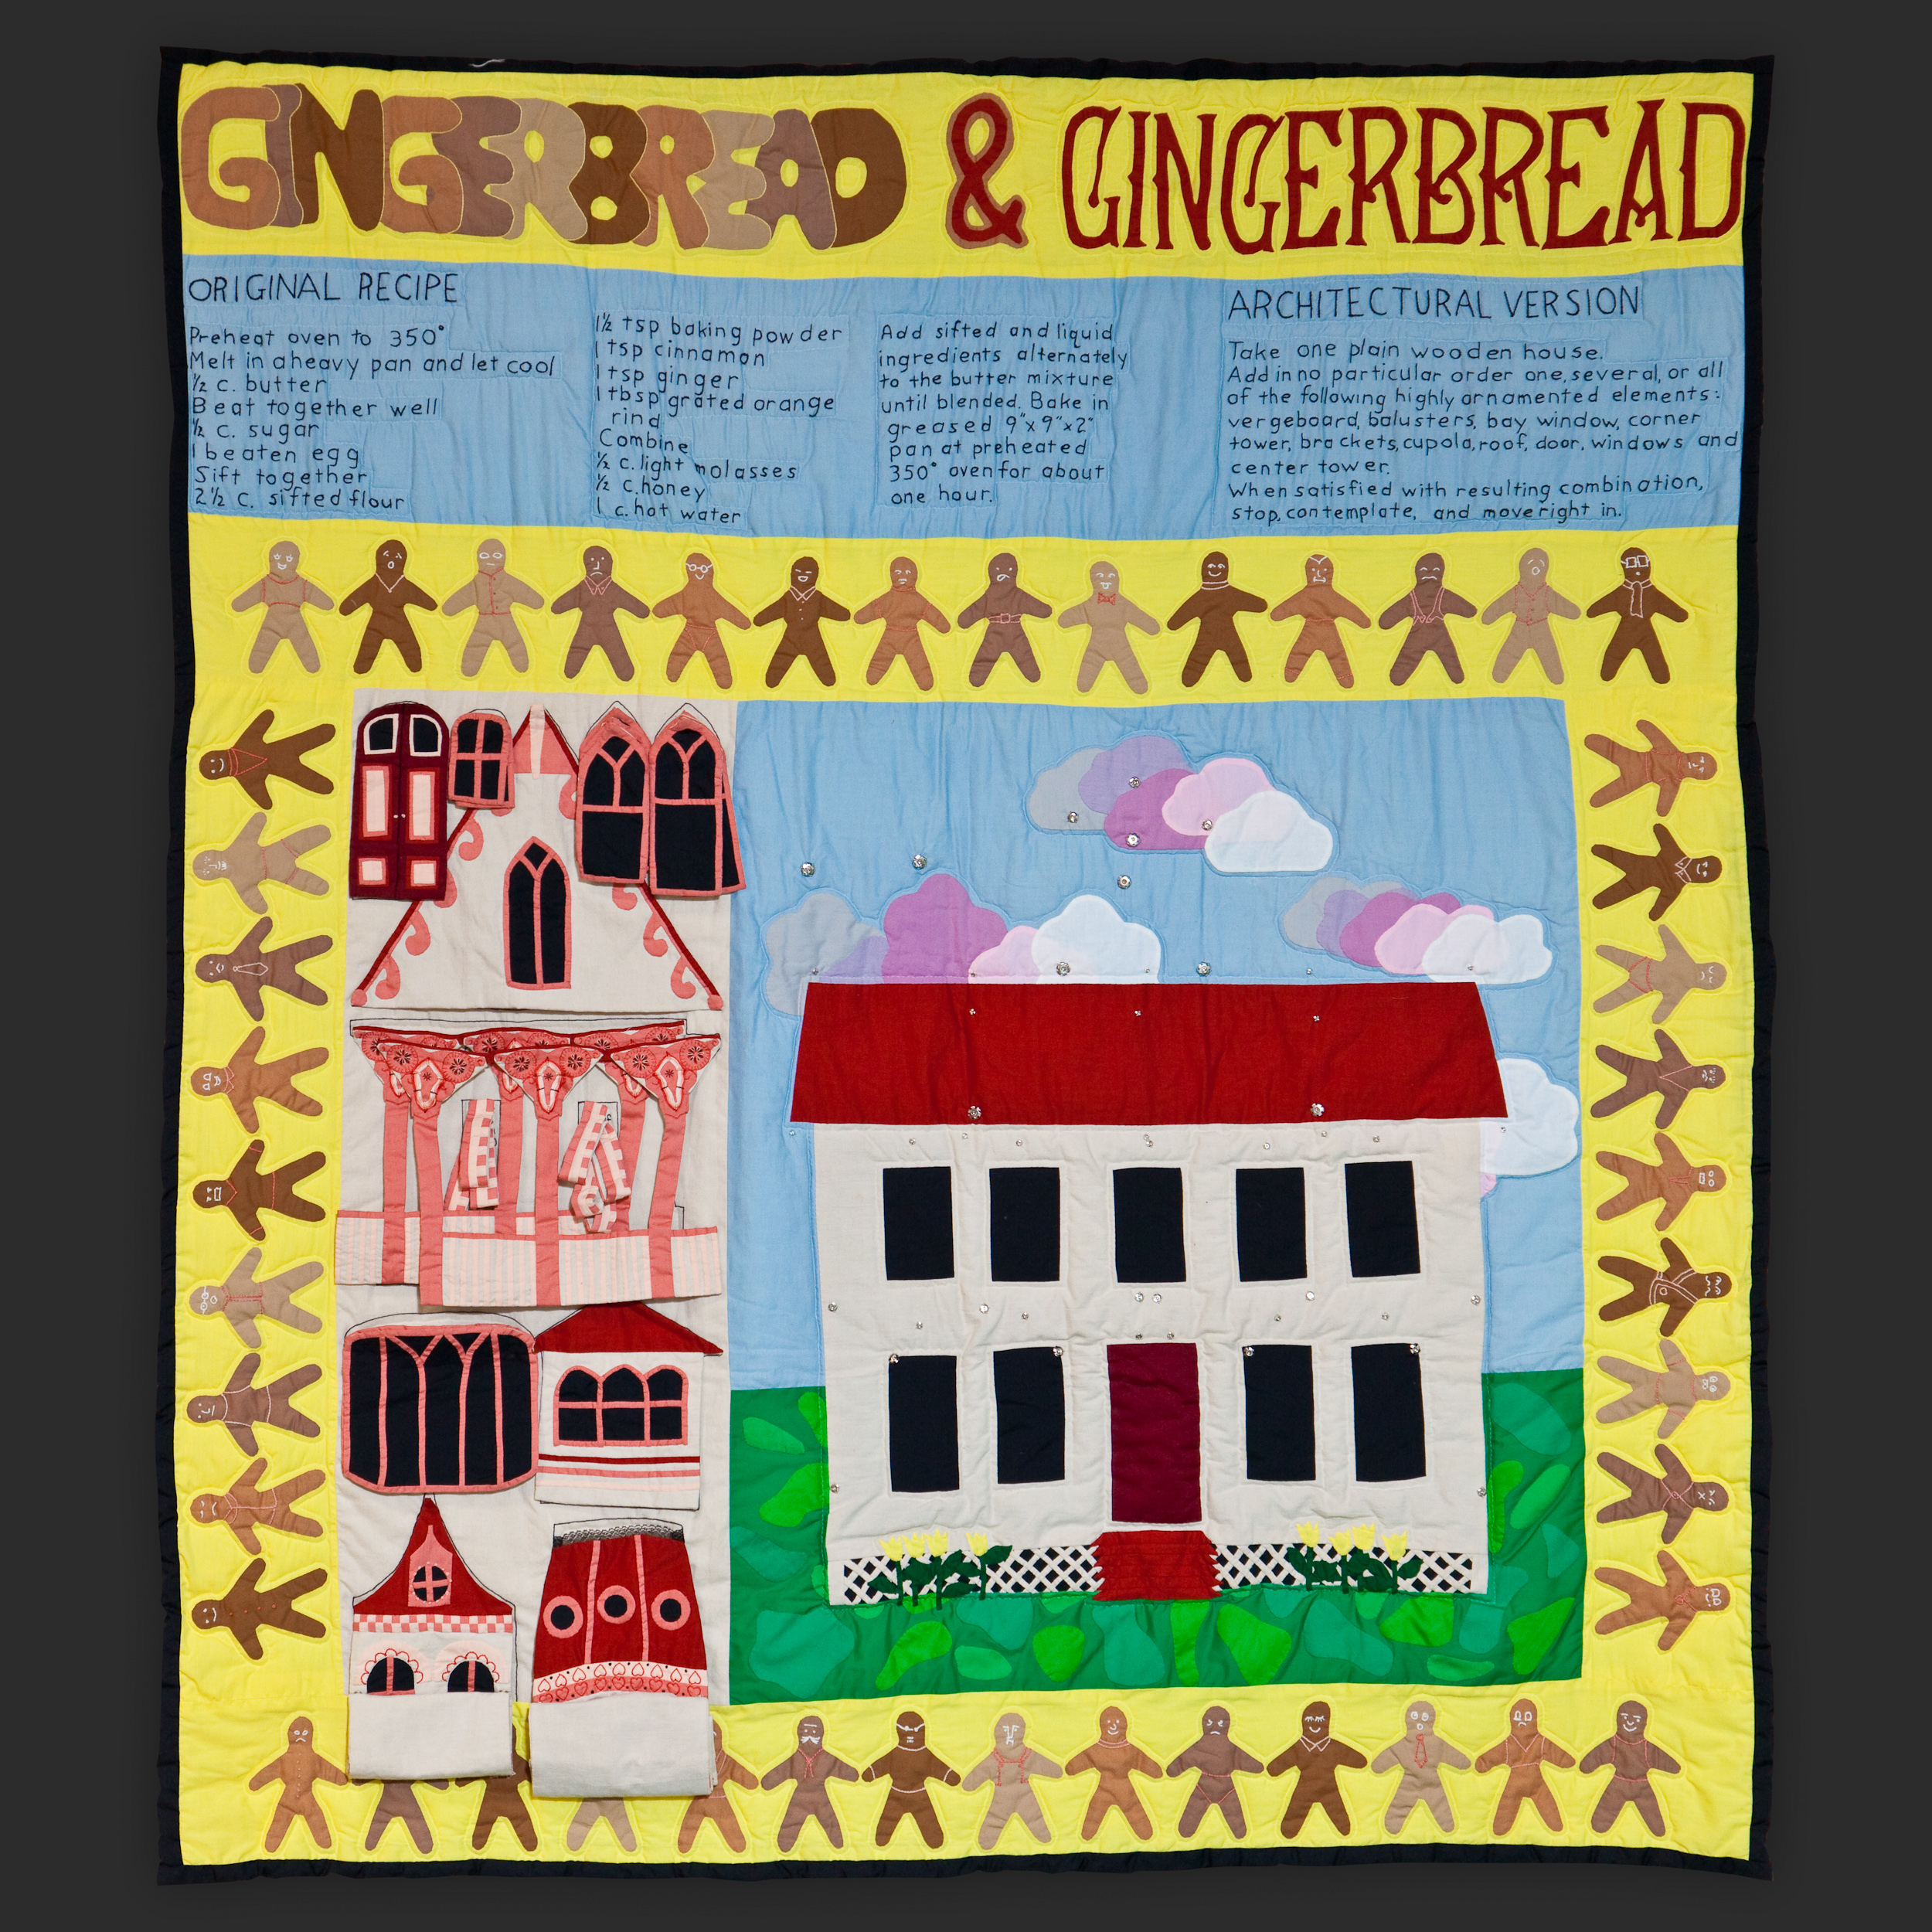 Gingerbread And Gingerbread detail